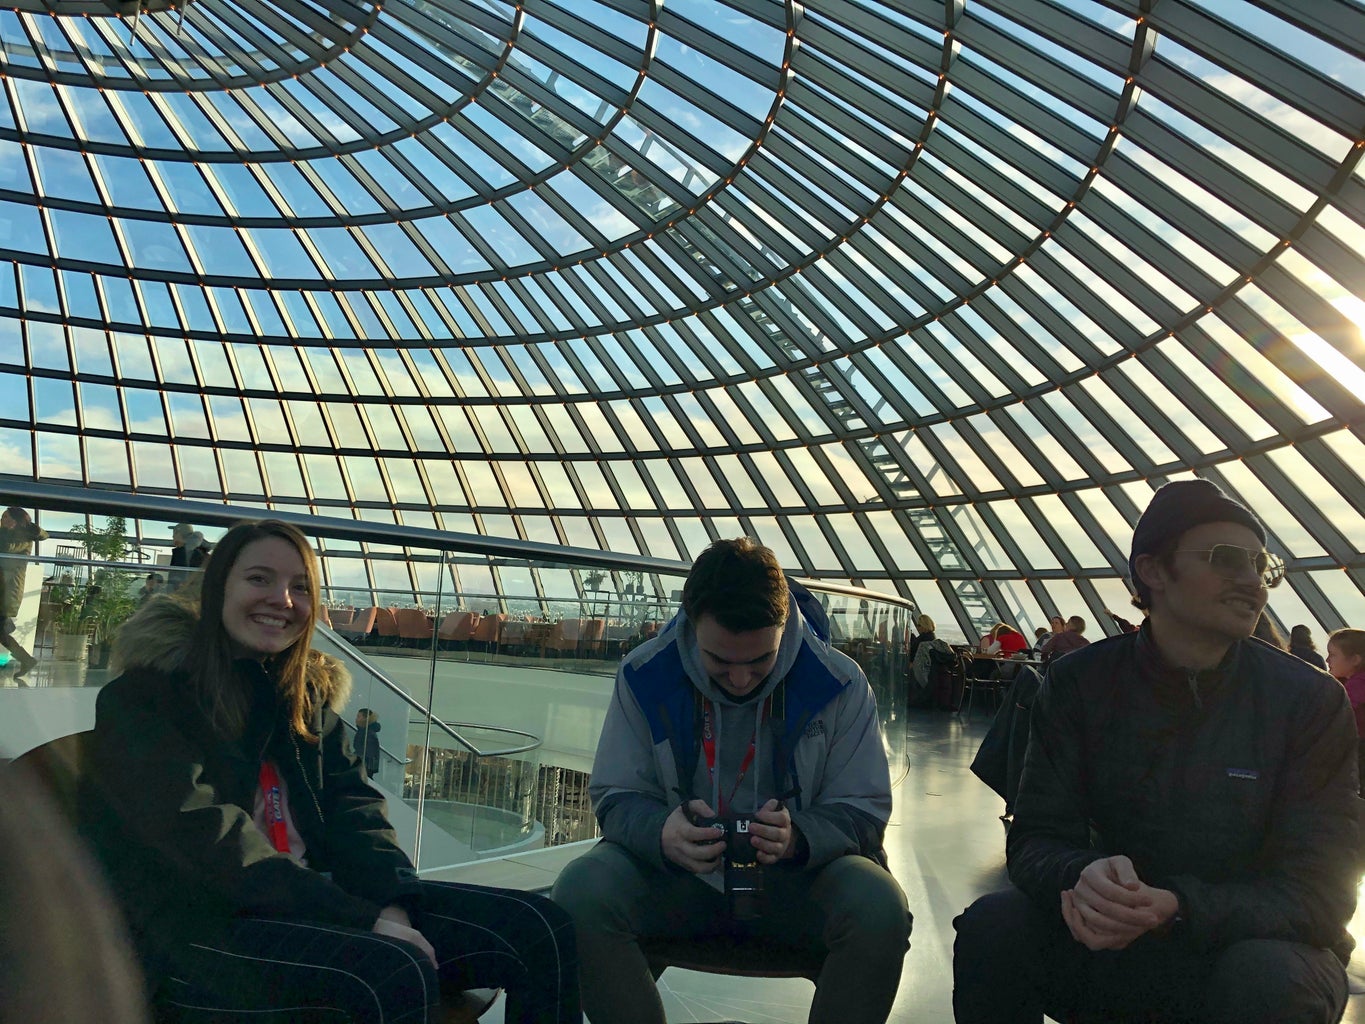 Myself, boyfriend, and Dad in dome of Perlan